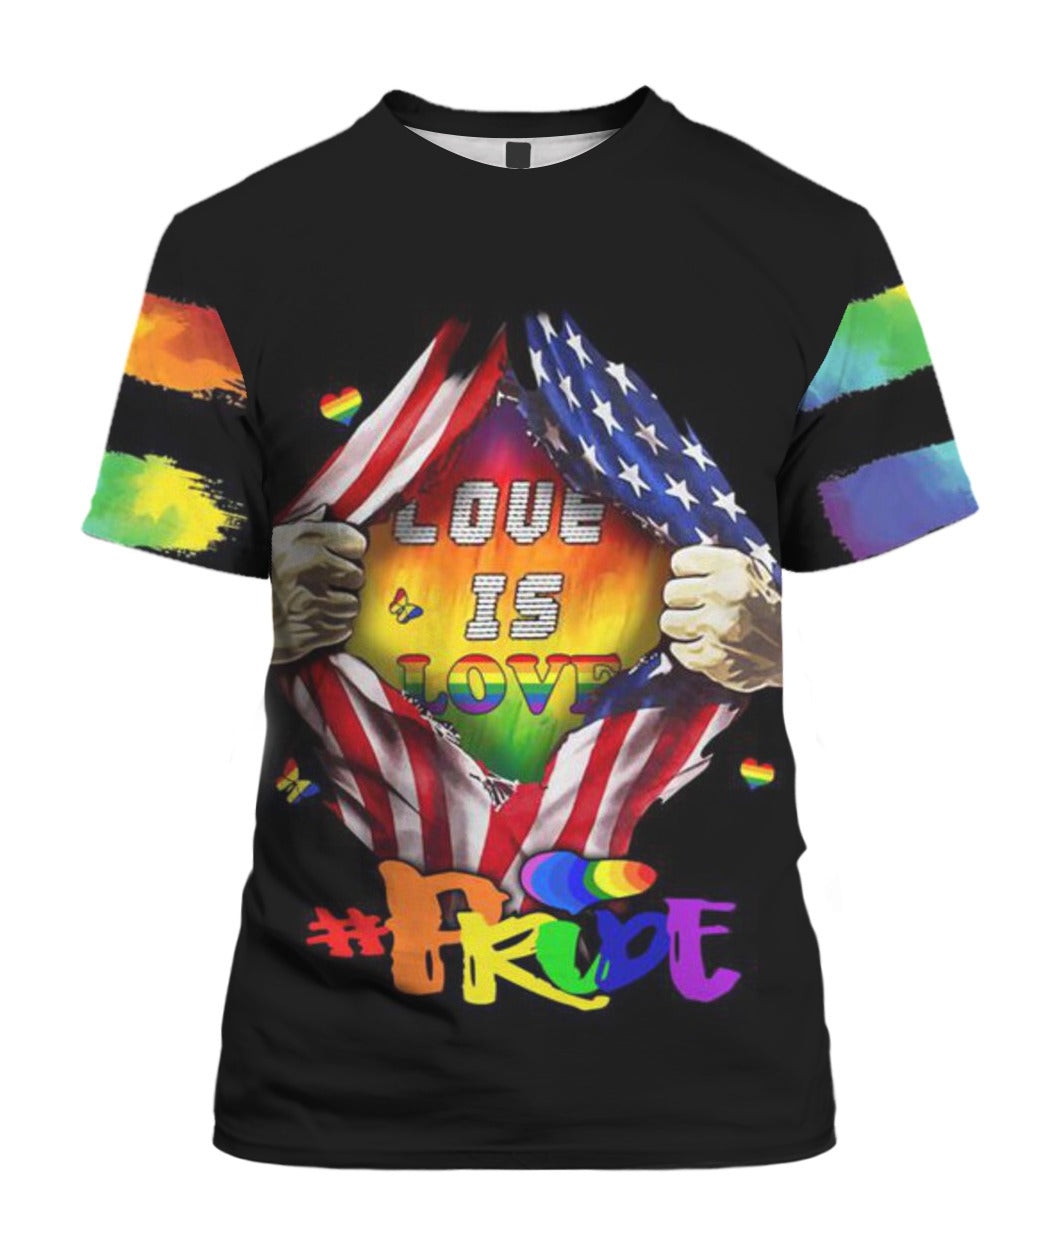 I Am Gay Til I Die 3D T Shirt For Lgbt Community/ Gay Friend Gifts/ Pride Full Printed Shirt For Him/ To My Gay Friend Gifts